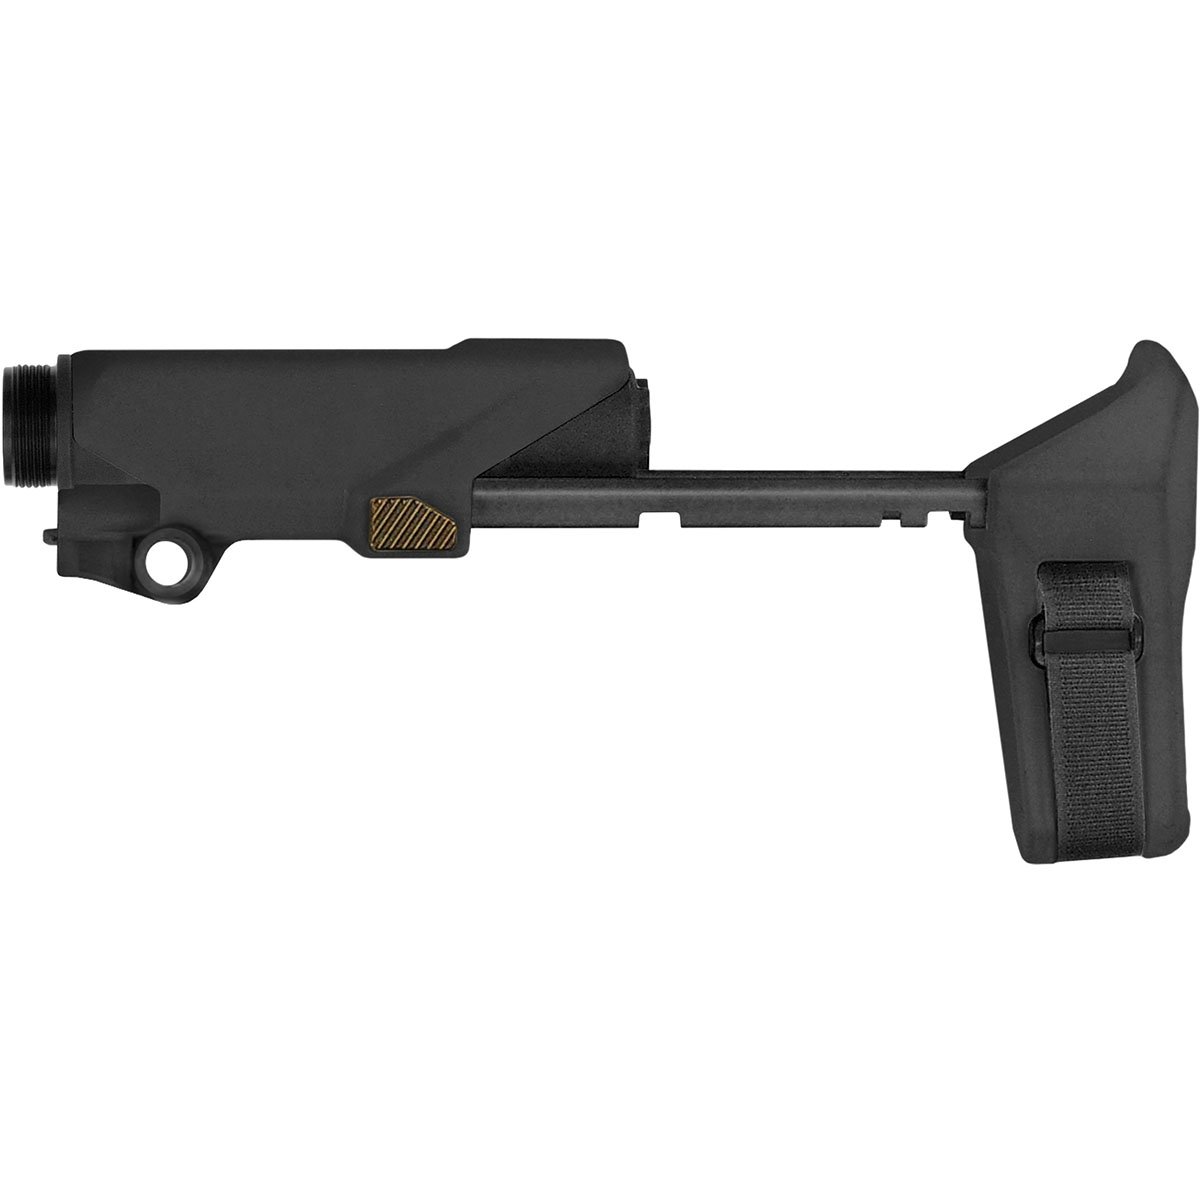 SB TACTICAL - HBPDW™ 9MM LUGER PISTOL STABILIZING BRACE FOR AR-15